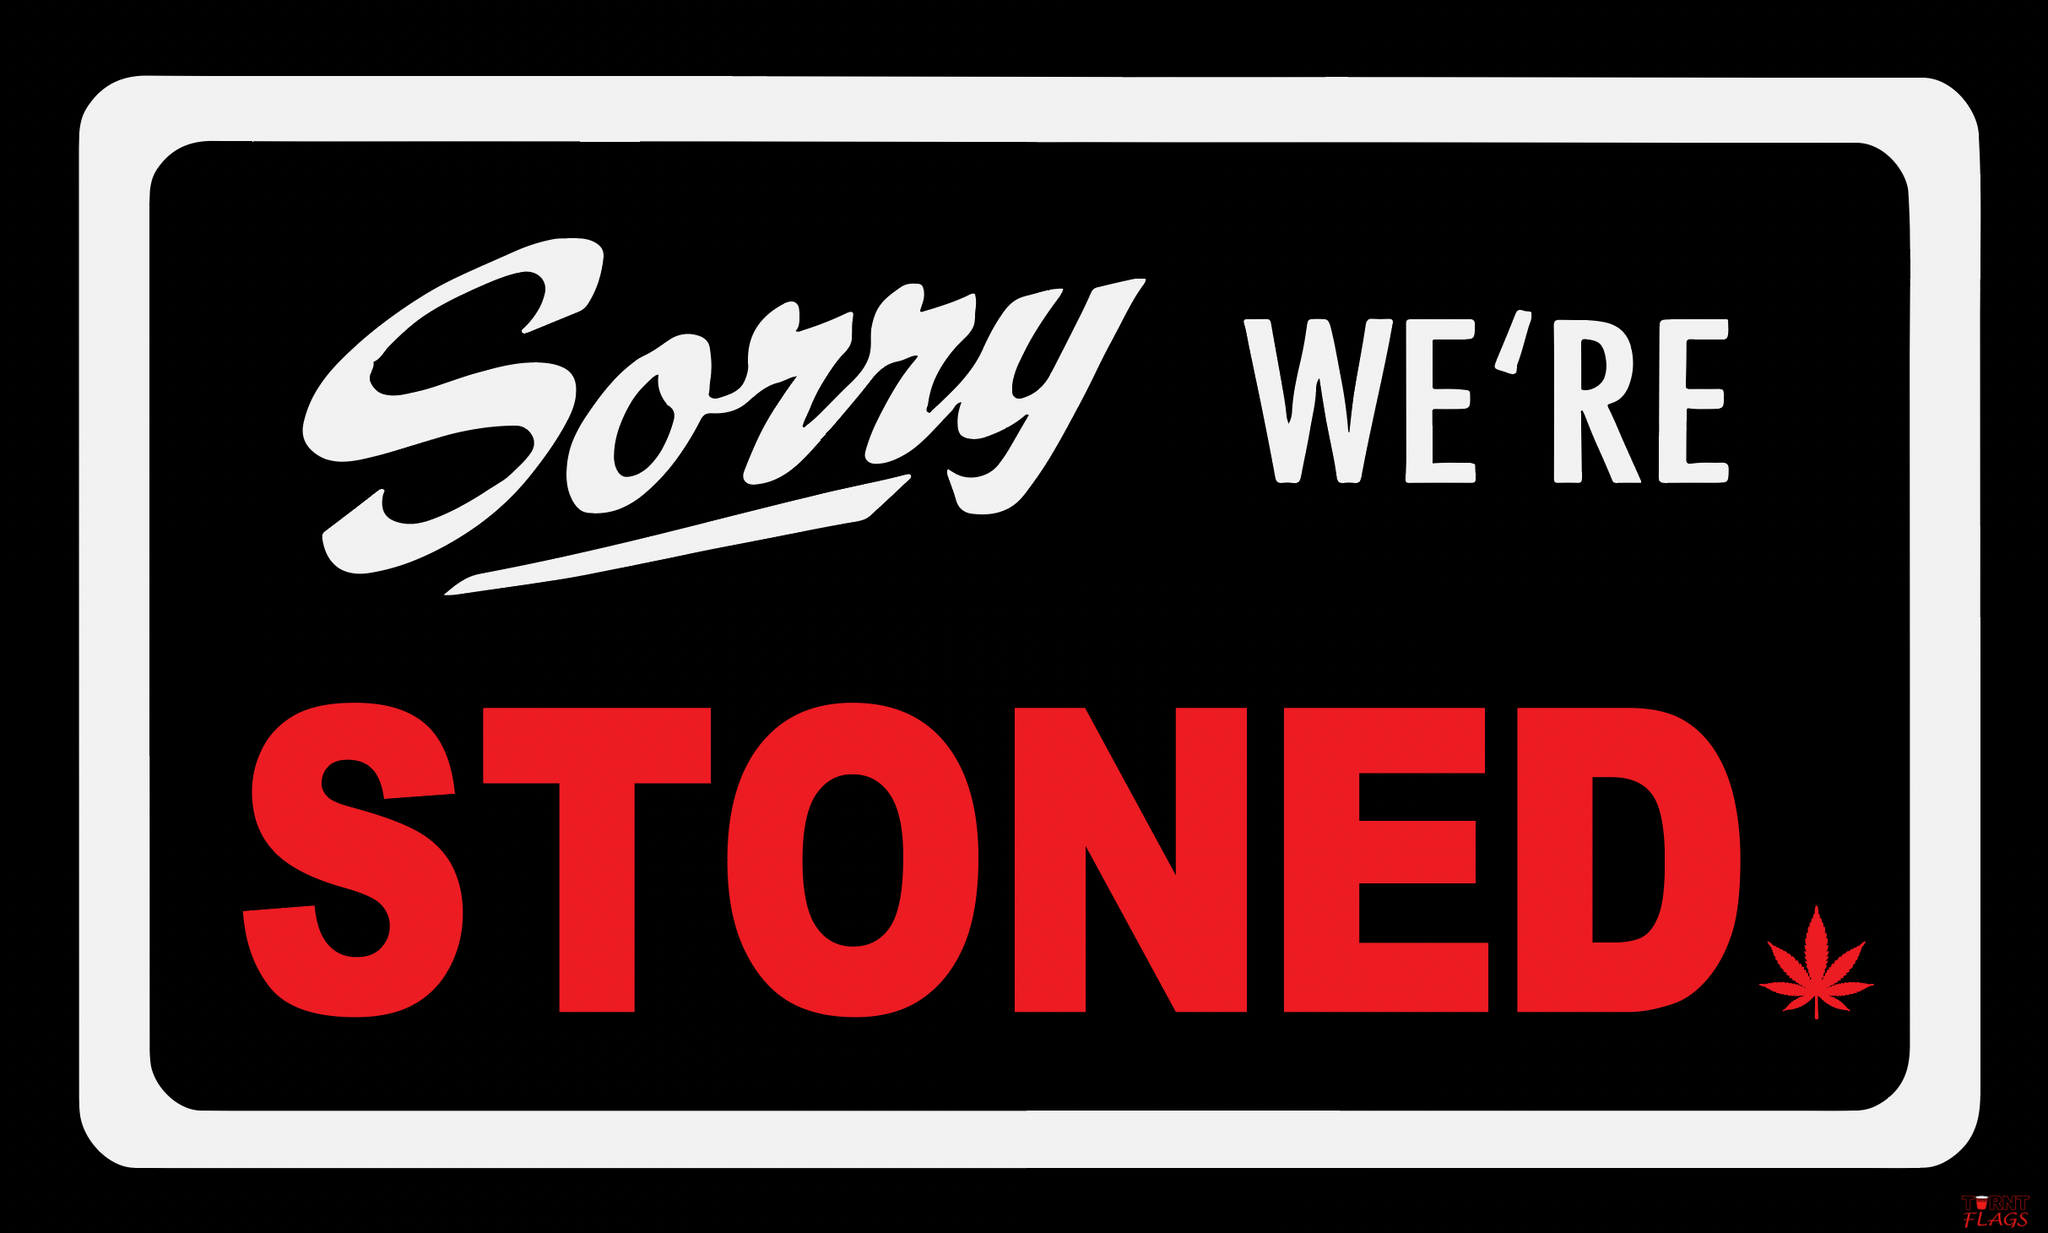 Sorry we're stoned